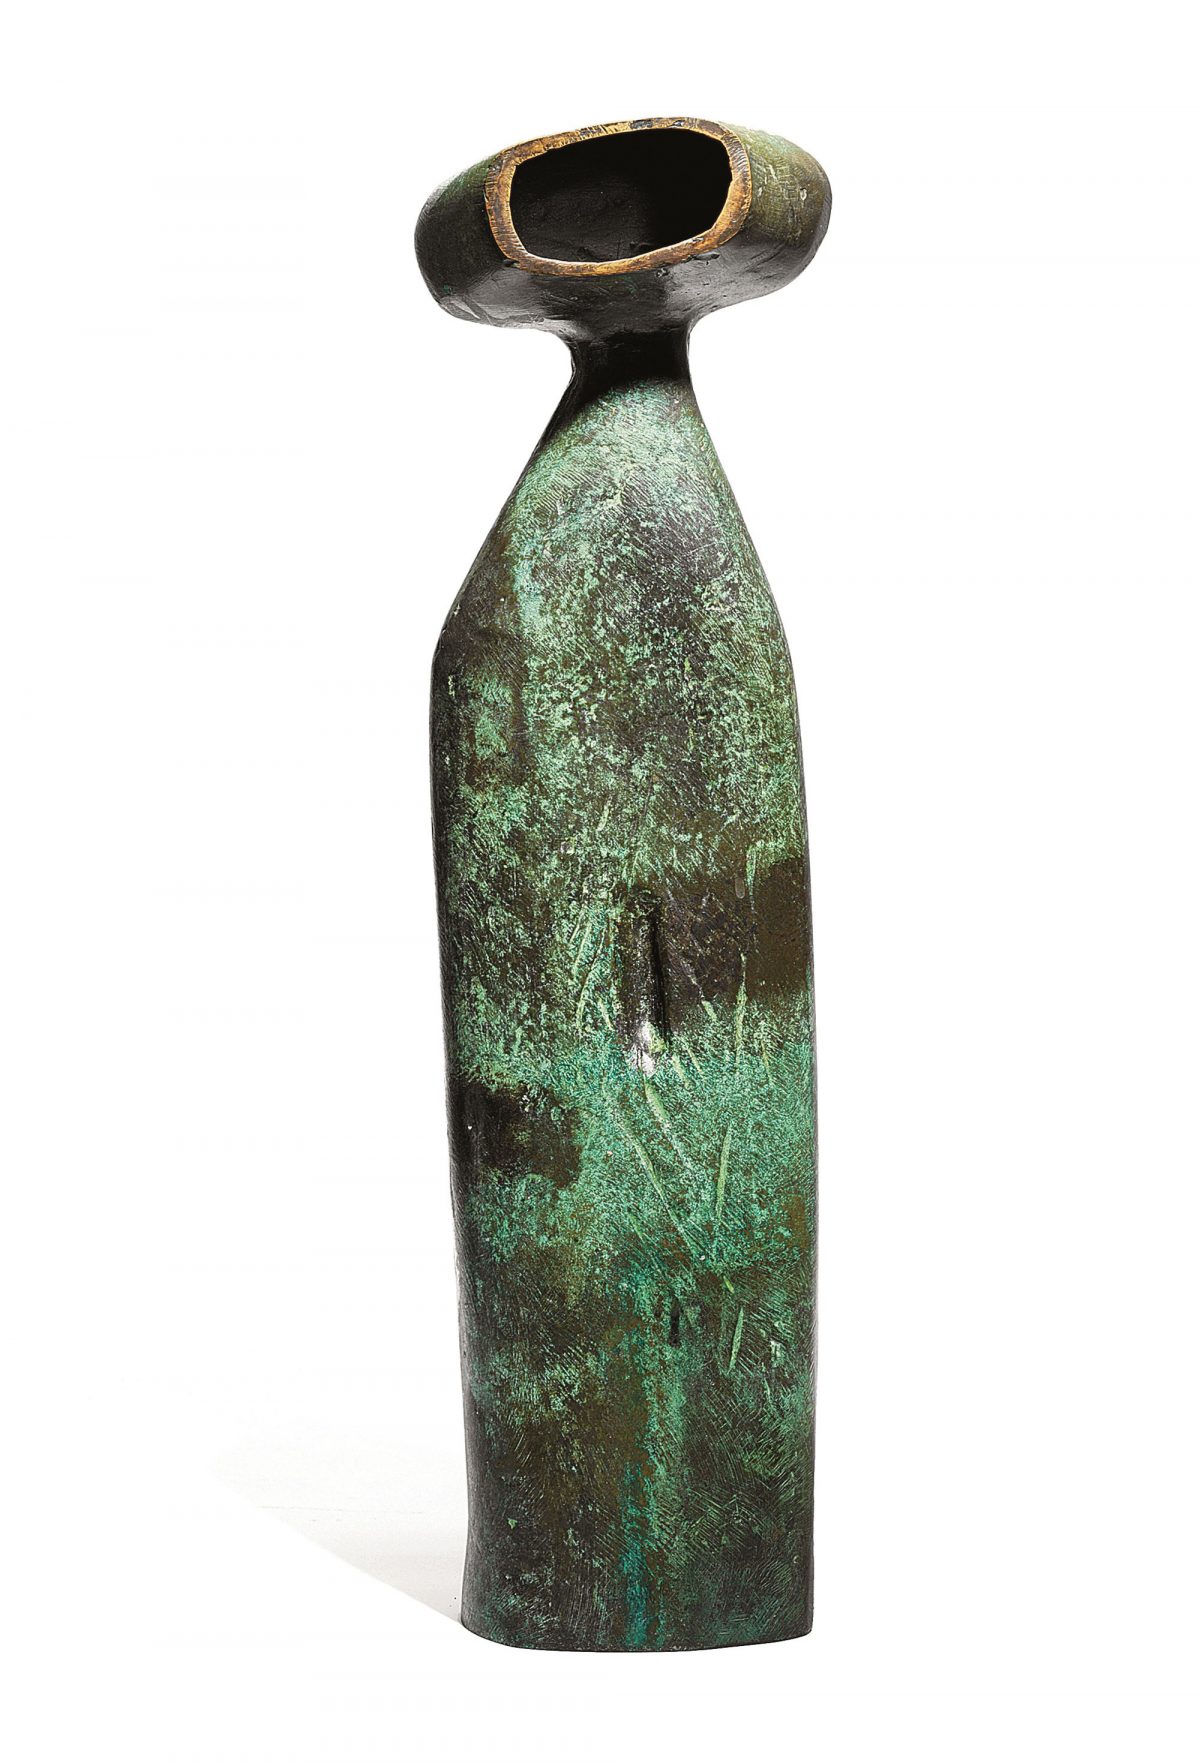 Kenneth Armitage (1916–2002), bronze with a green patina, unique